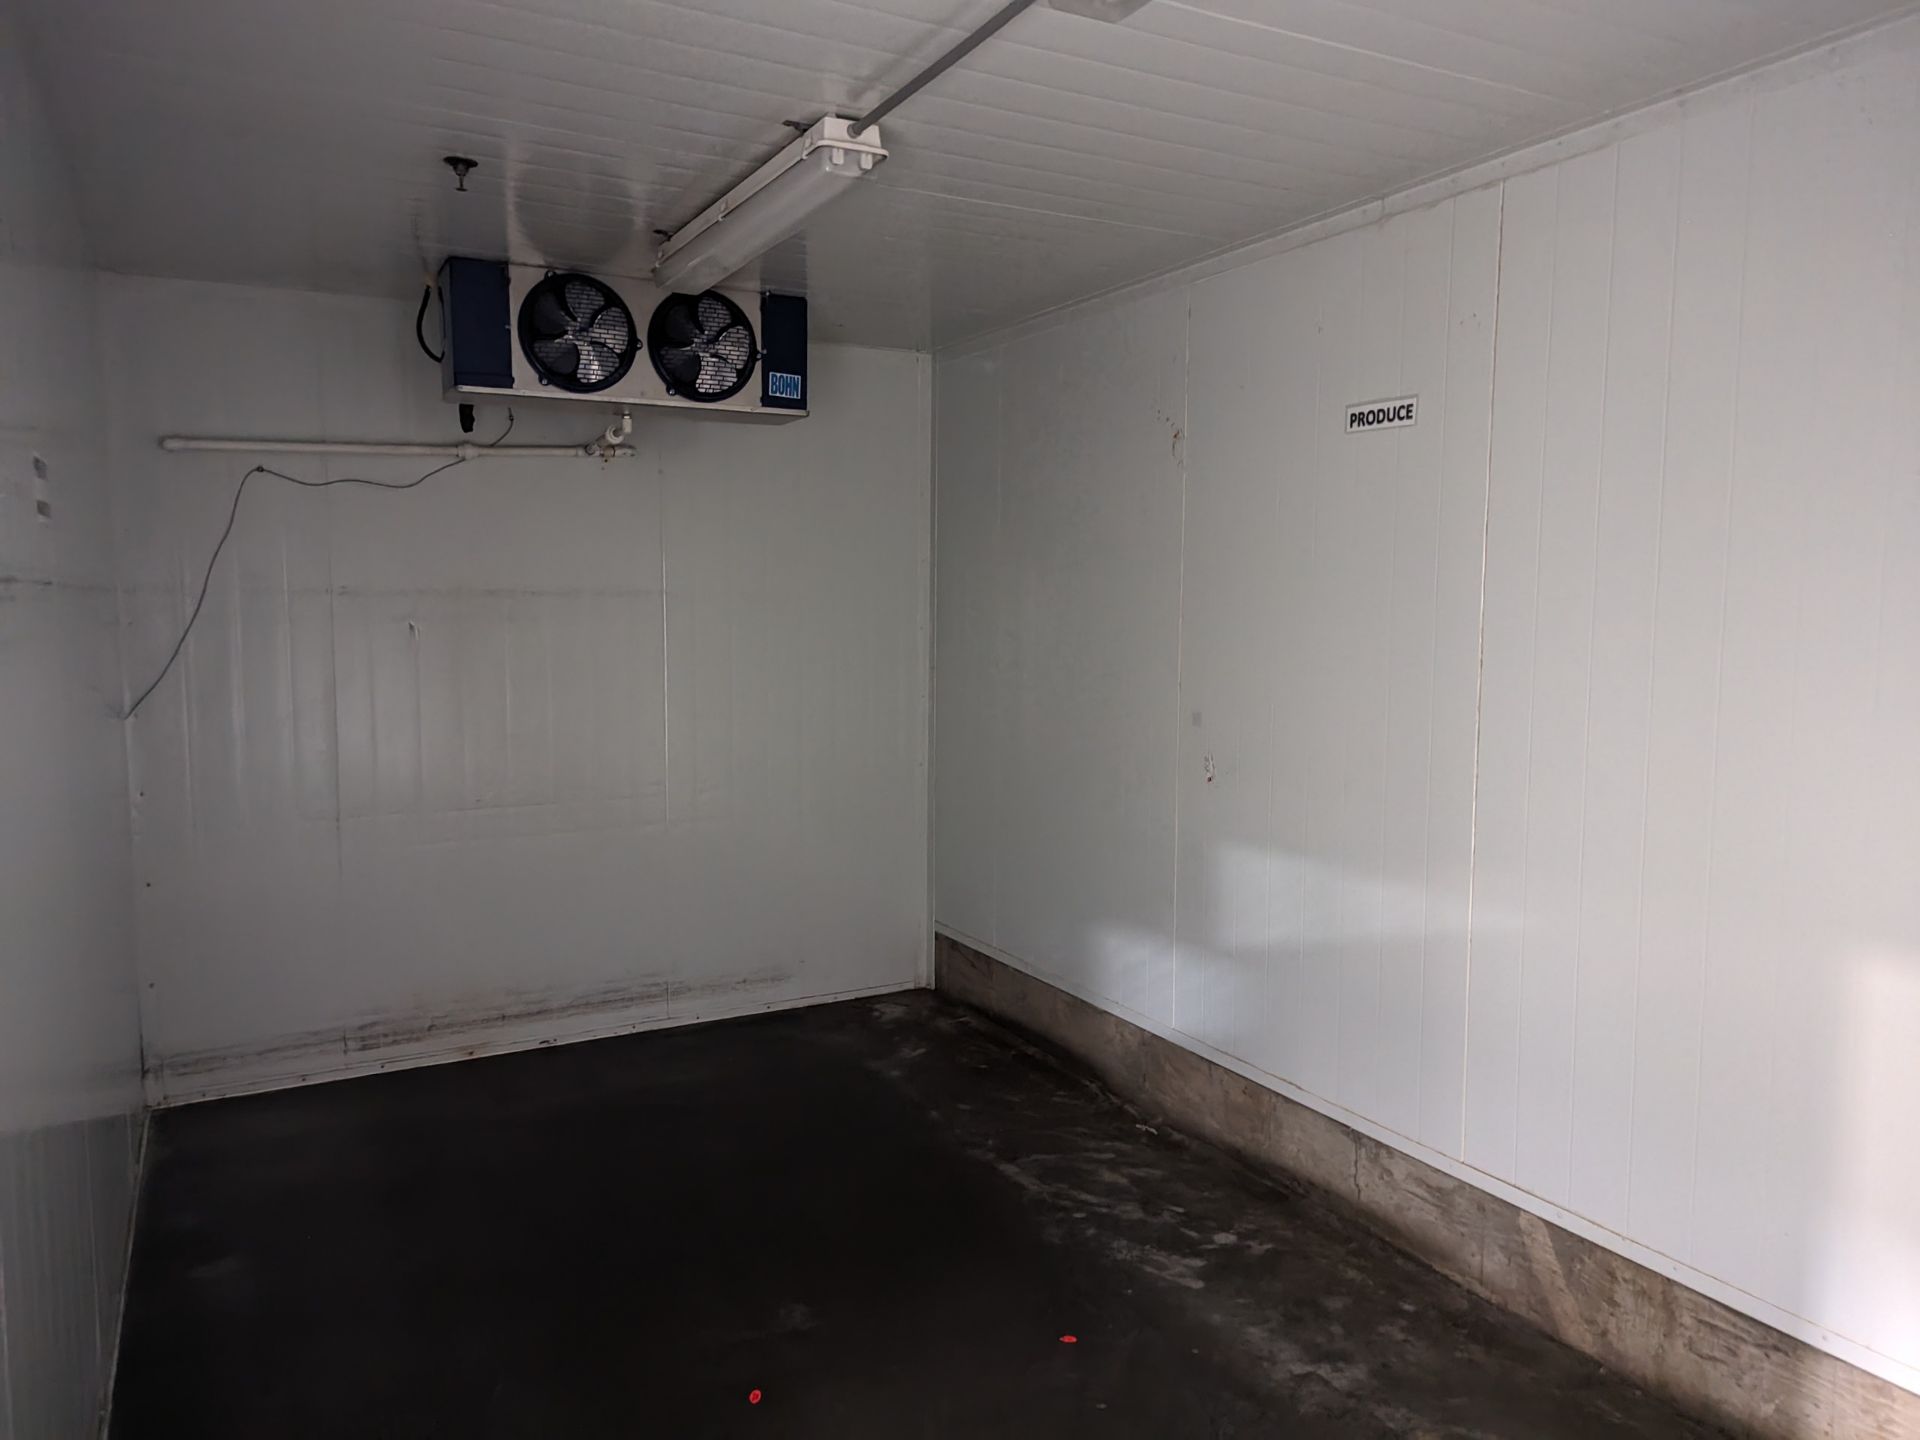 Two Room Walk In Cooler, Overall 33' x 10' x 113" Does not include rear wall. Evaporators - Image 8 of 16